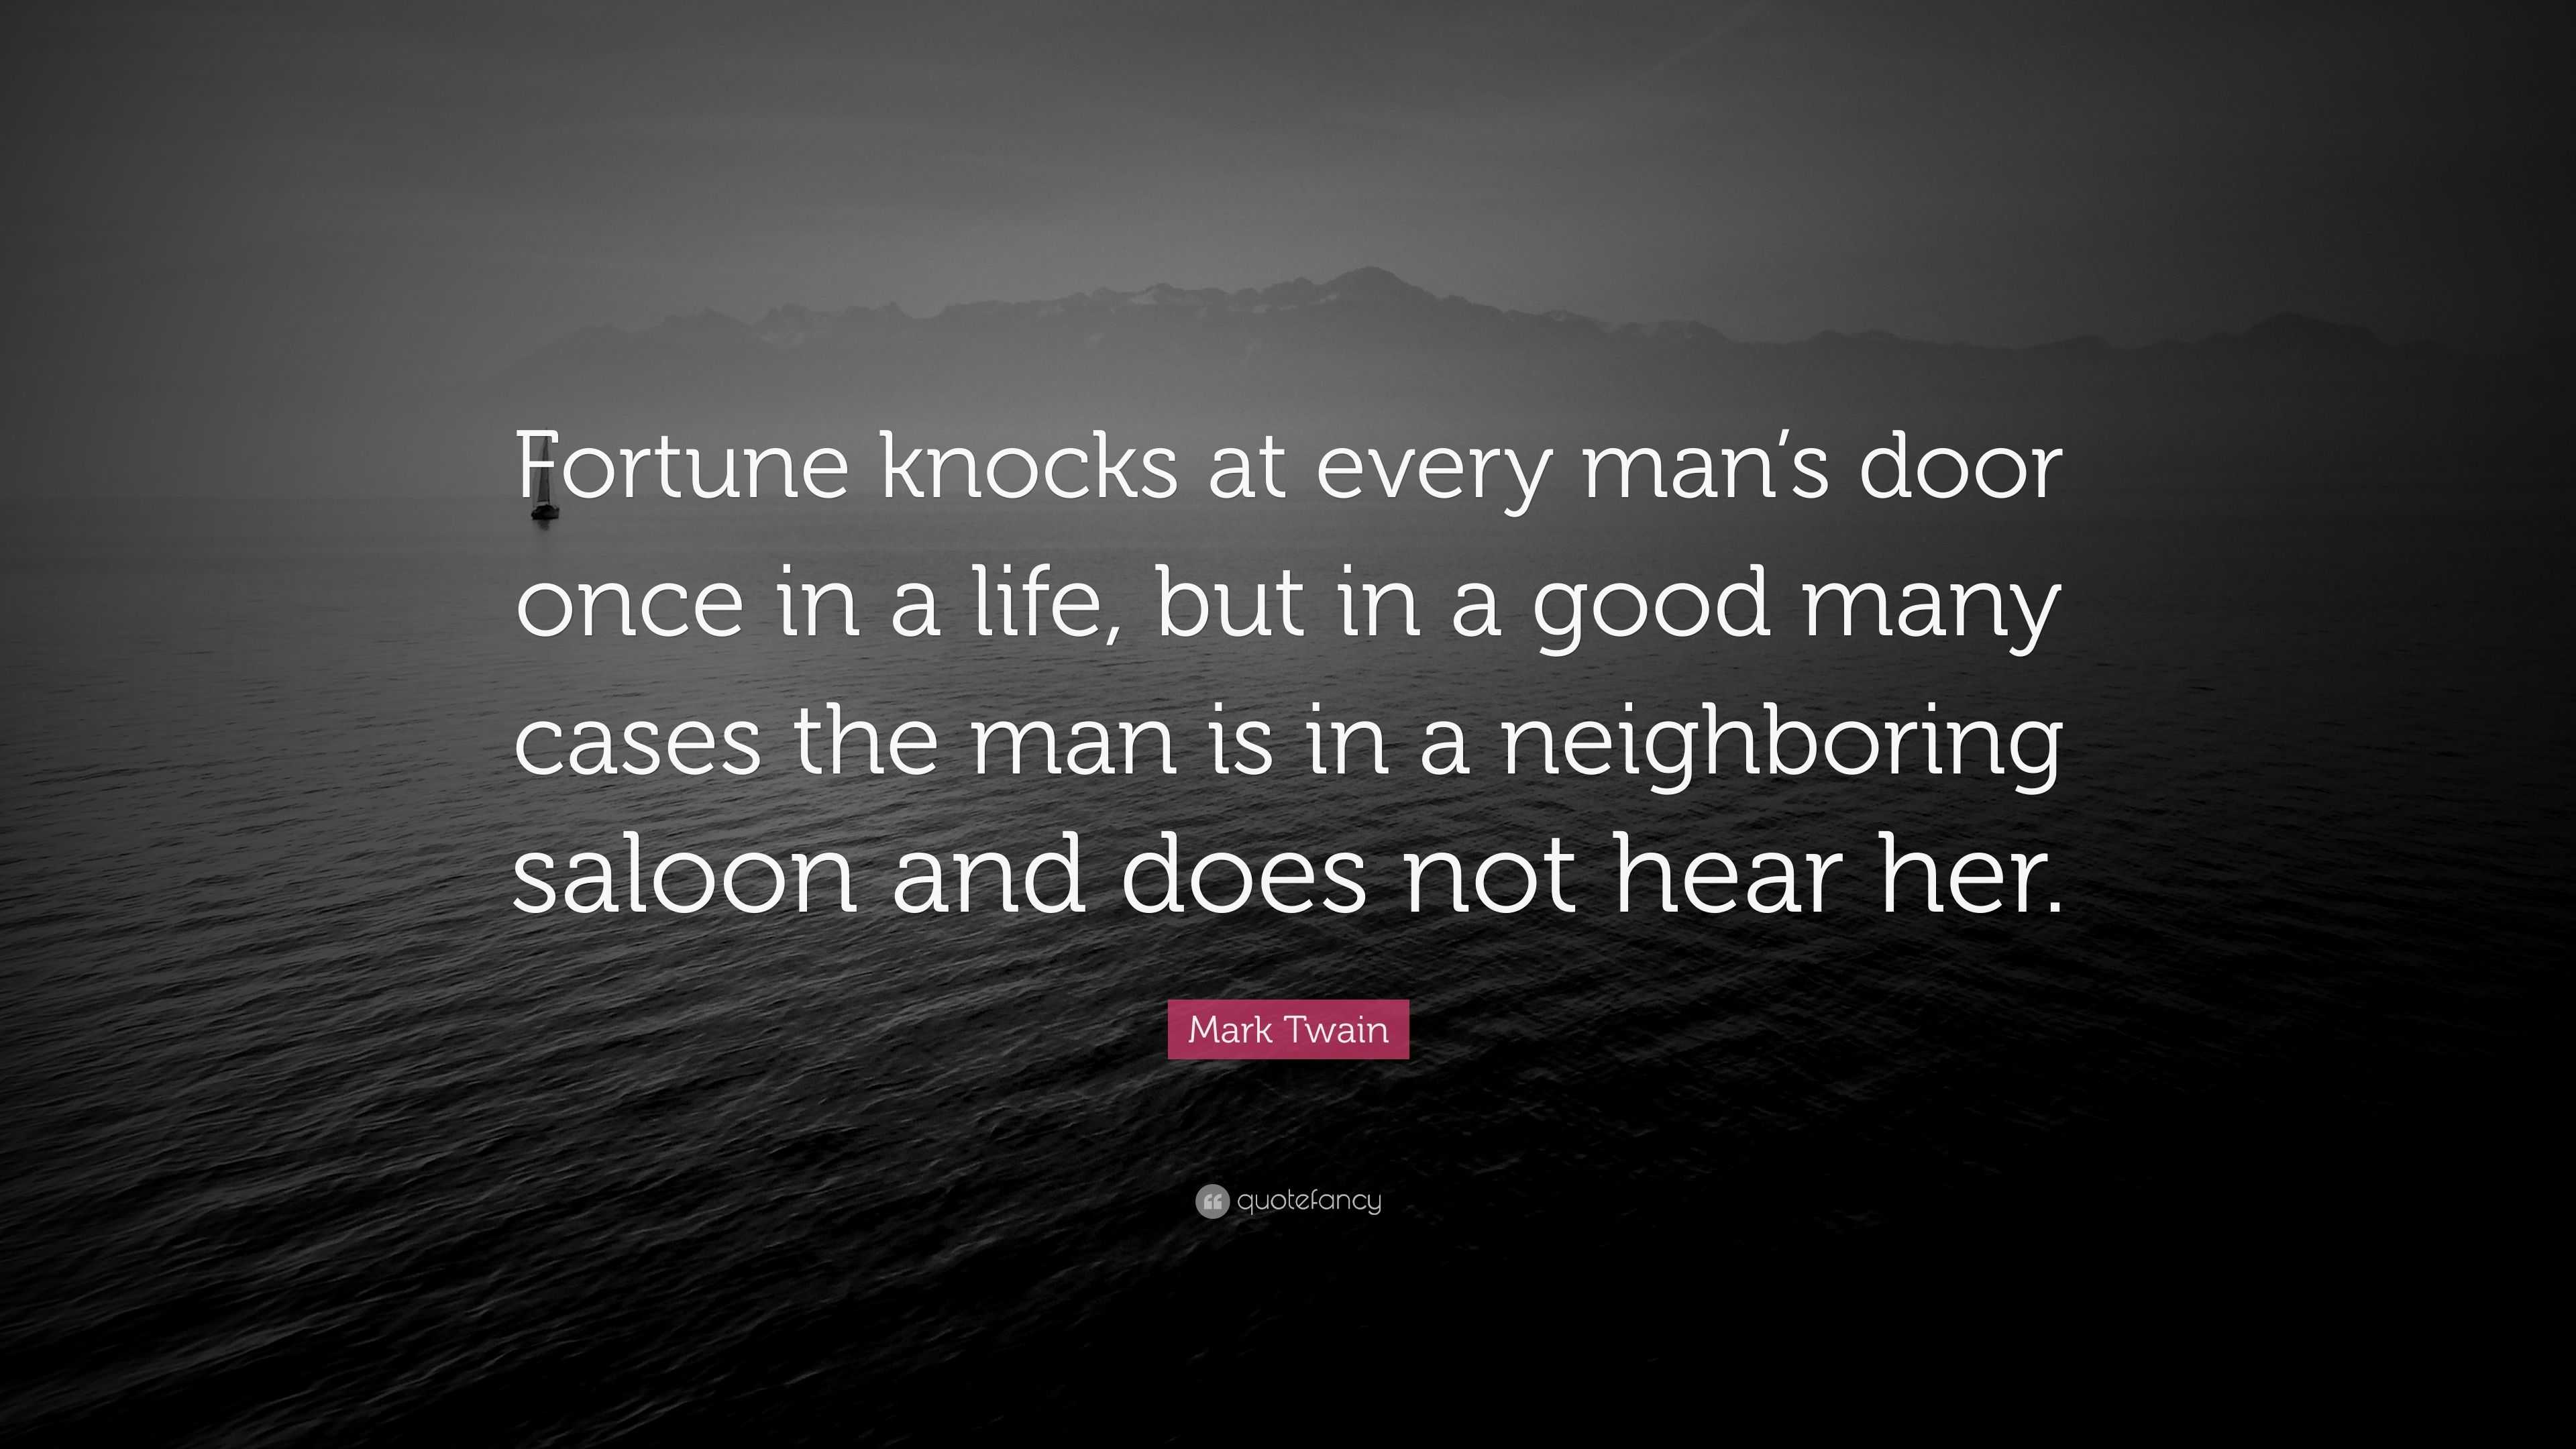 Mark Twain Quote “Fortune knocks at every man s door once in a life